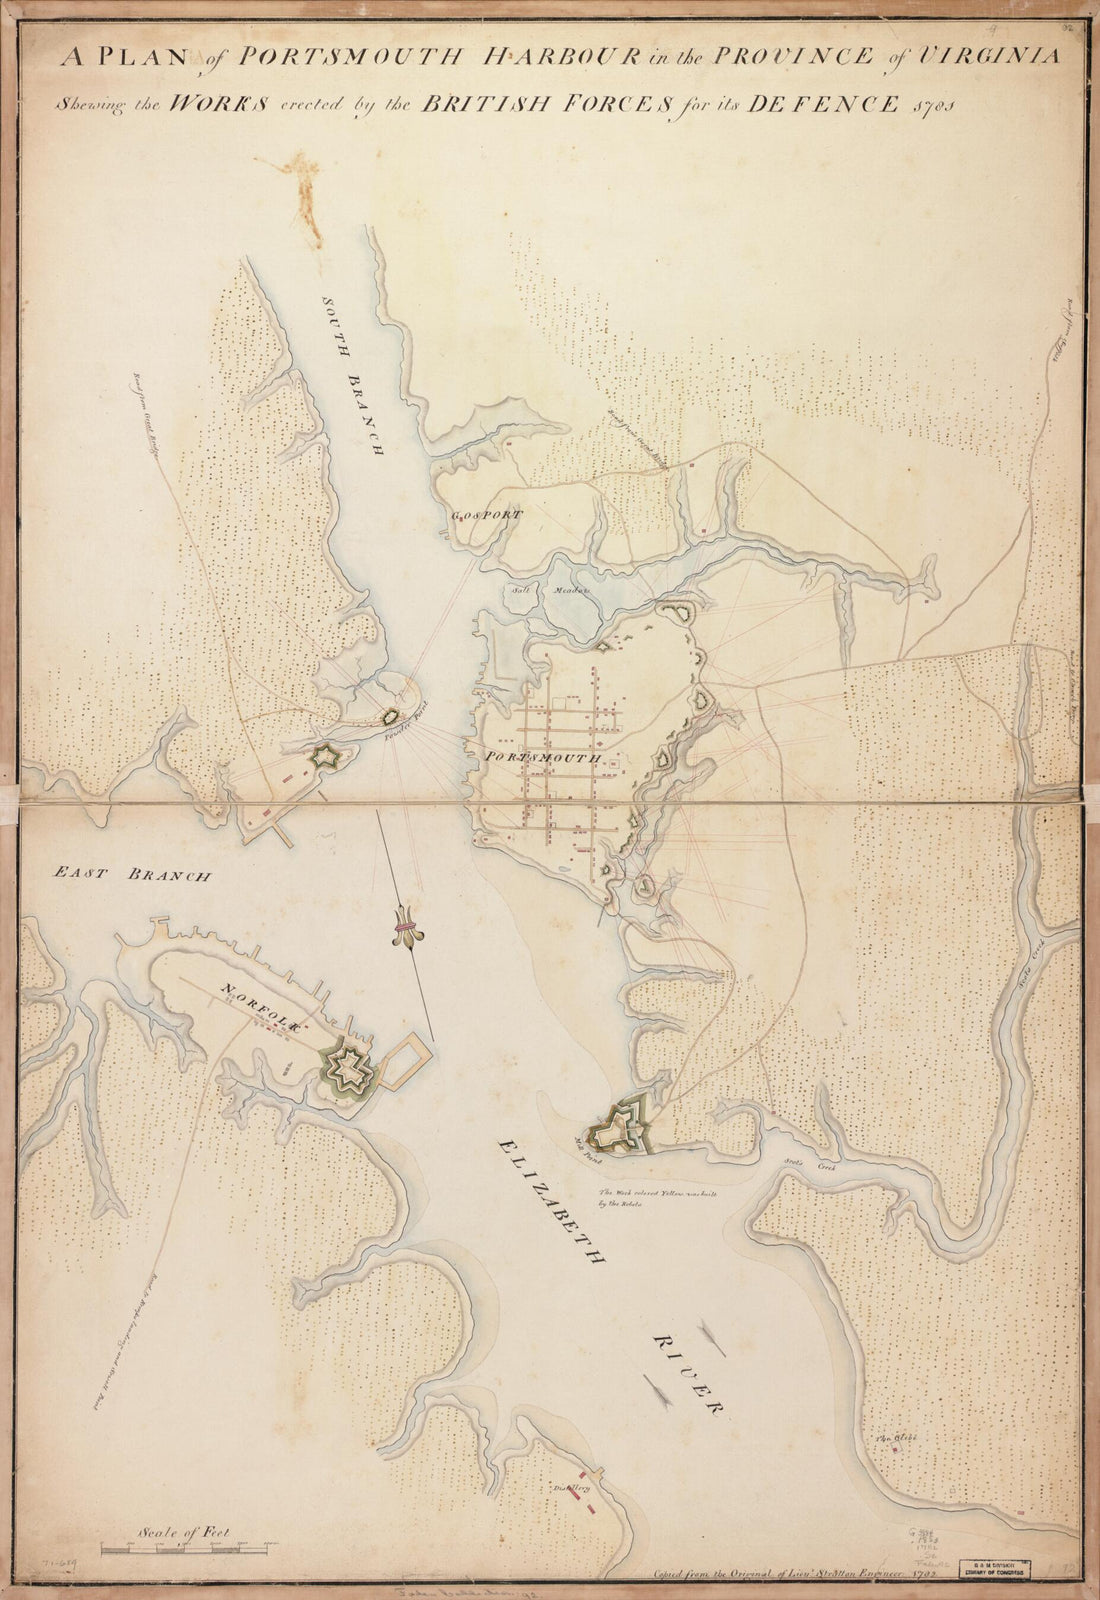 This old map of A Plan of Portsmouth Harbour In the Province of Virginia Shewing the Works Erected by the British Forces for Its Defence, 1781 from 1782 was created by James Stratton in 1782